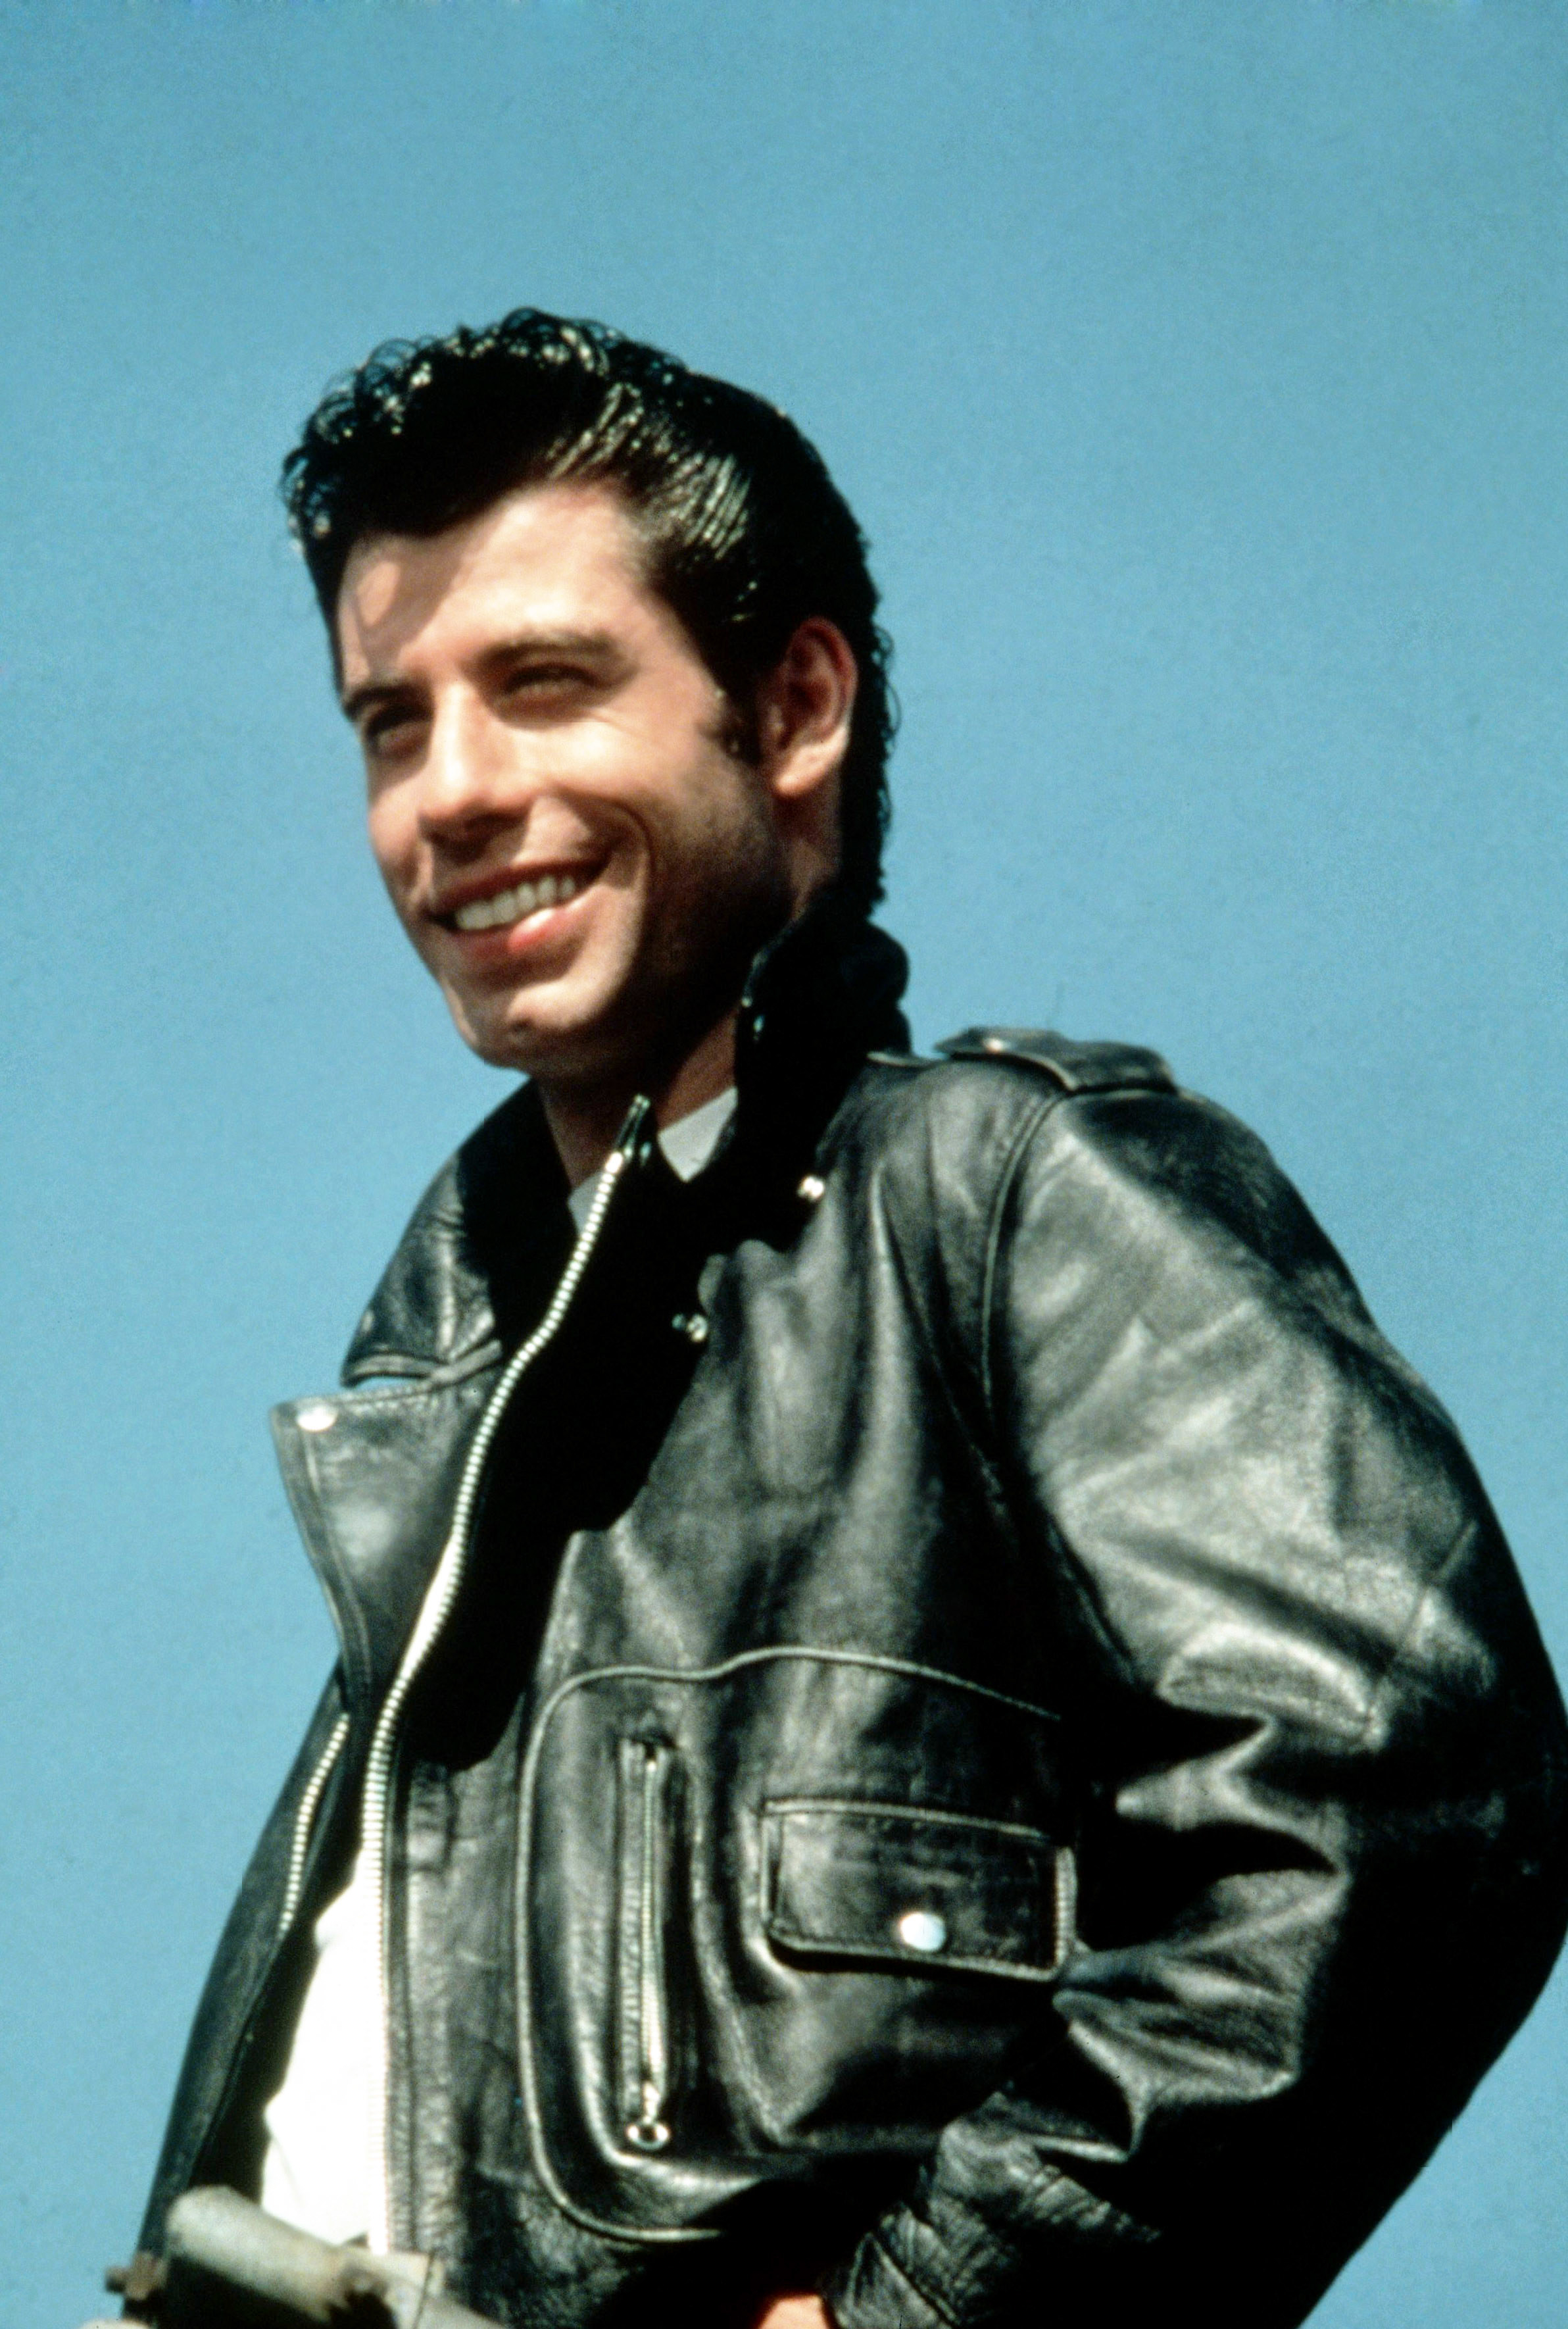 Danny in a leather jacket in &quot;Grease&quot;